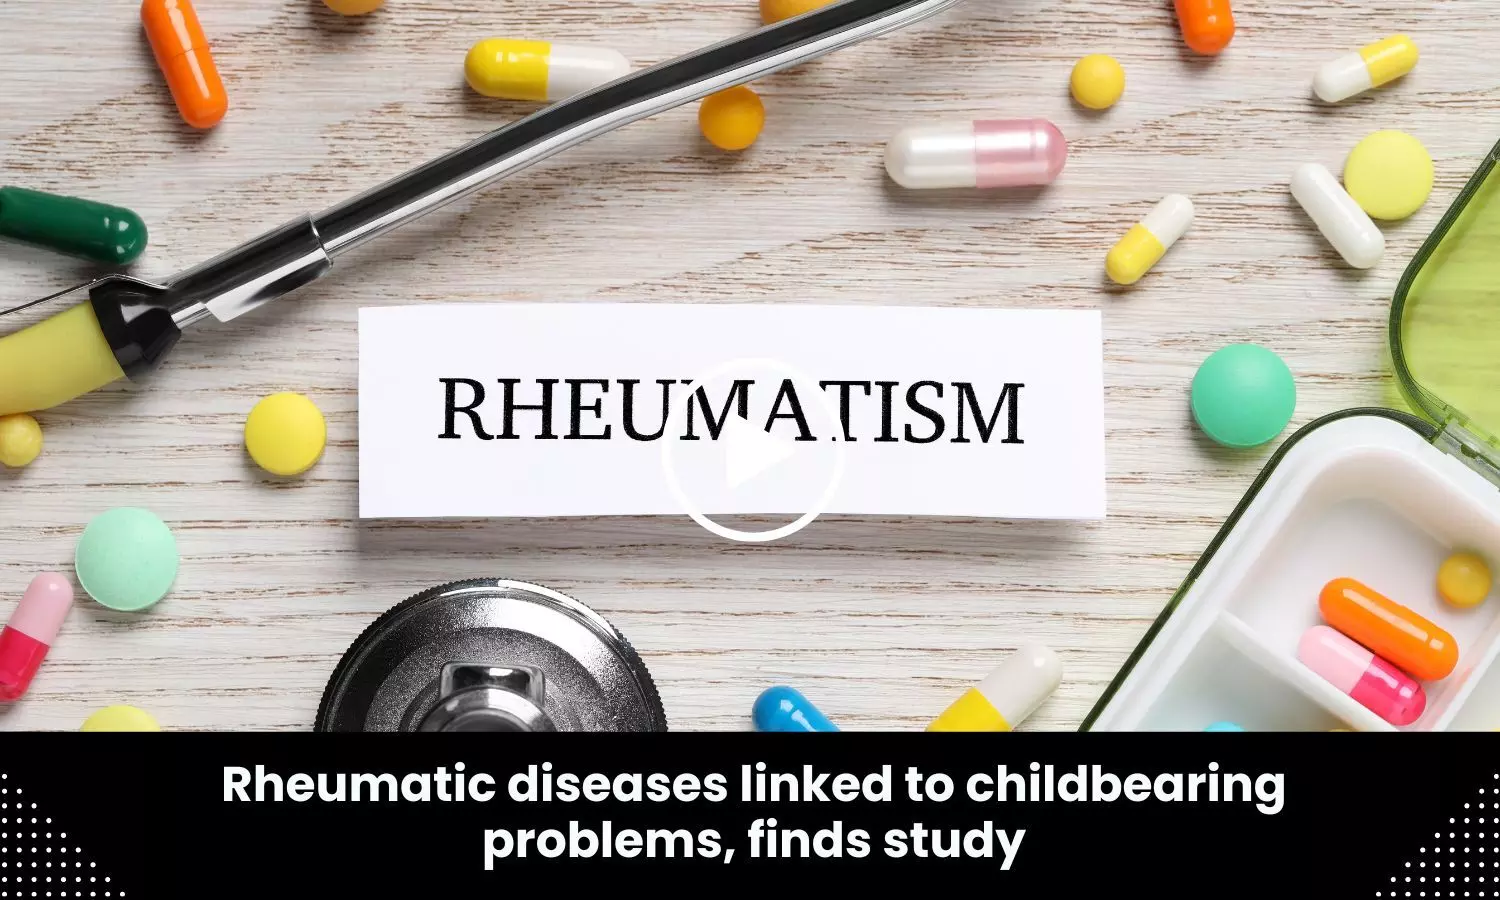 Rheumatic diseases linked to childbearing problems, finds study